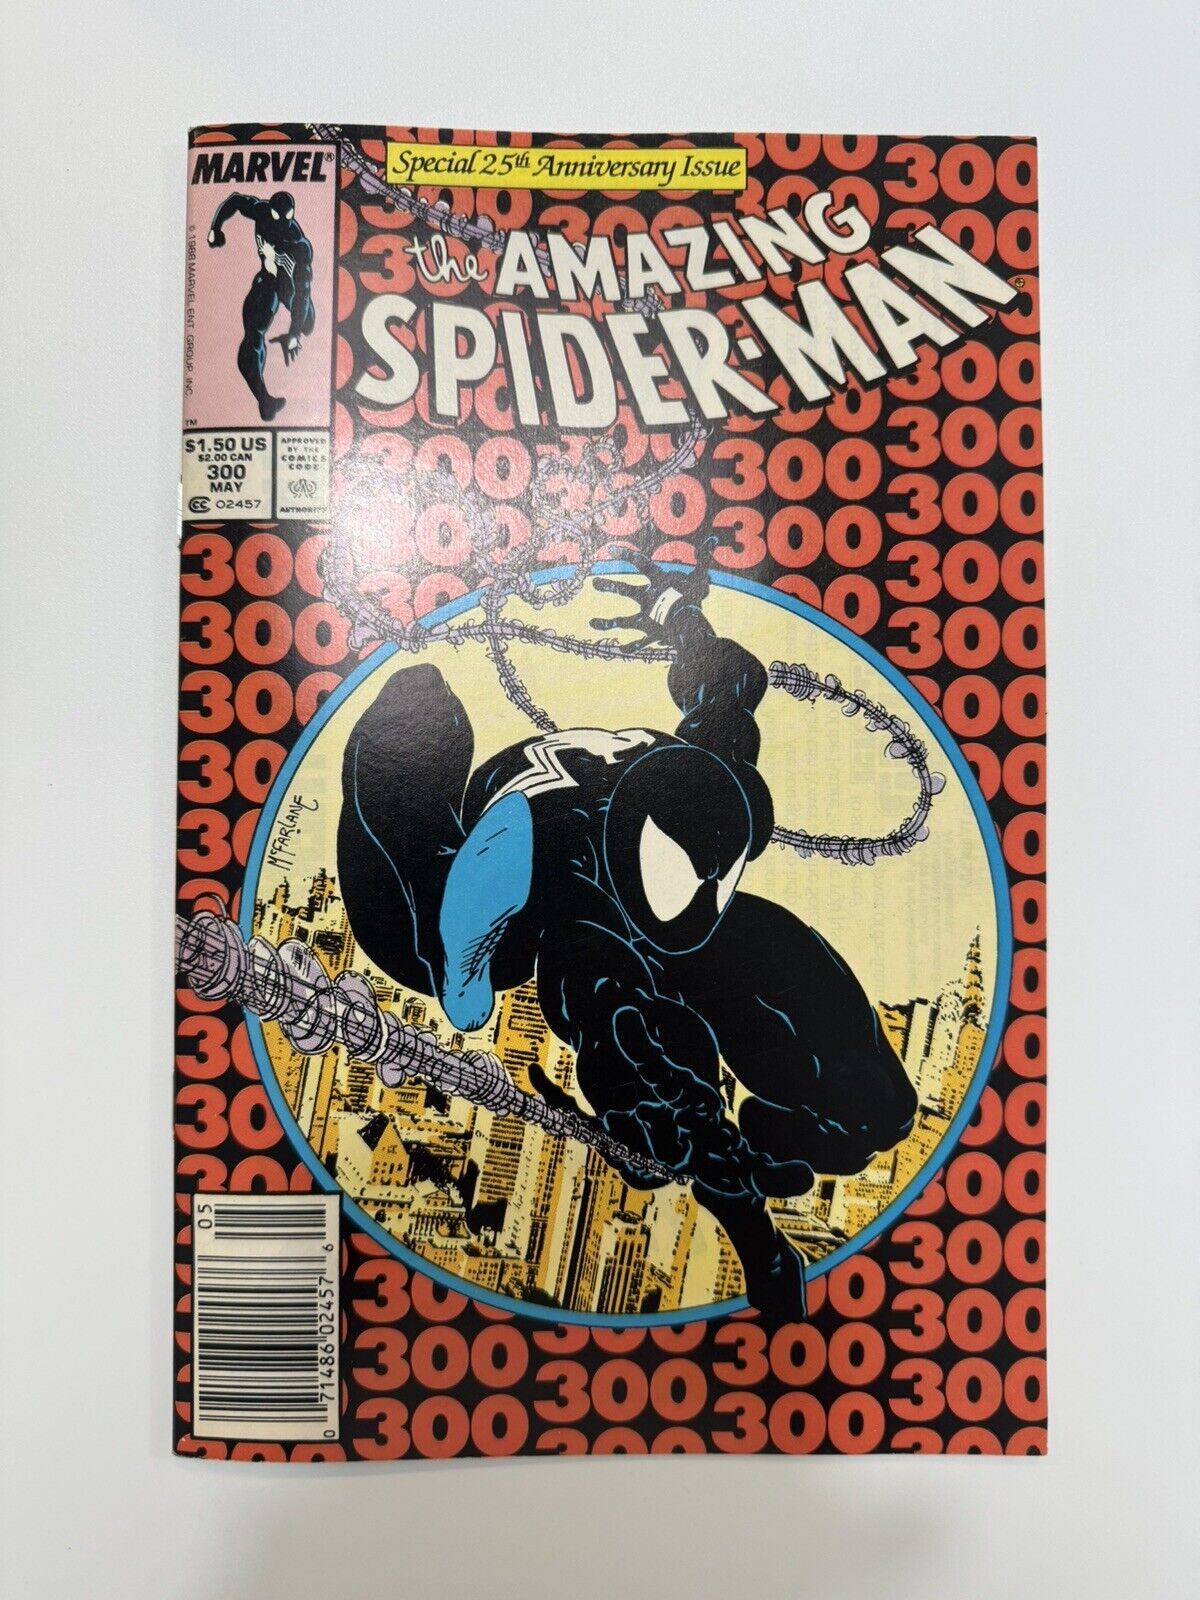 Amazing Spiderman #300 (1988) - SUPER RARE DOUBLE COVER  Key, Newsstand, beauty